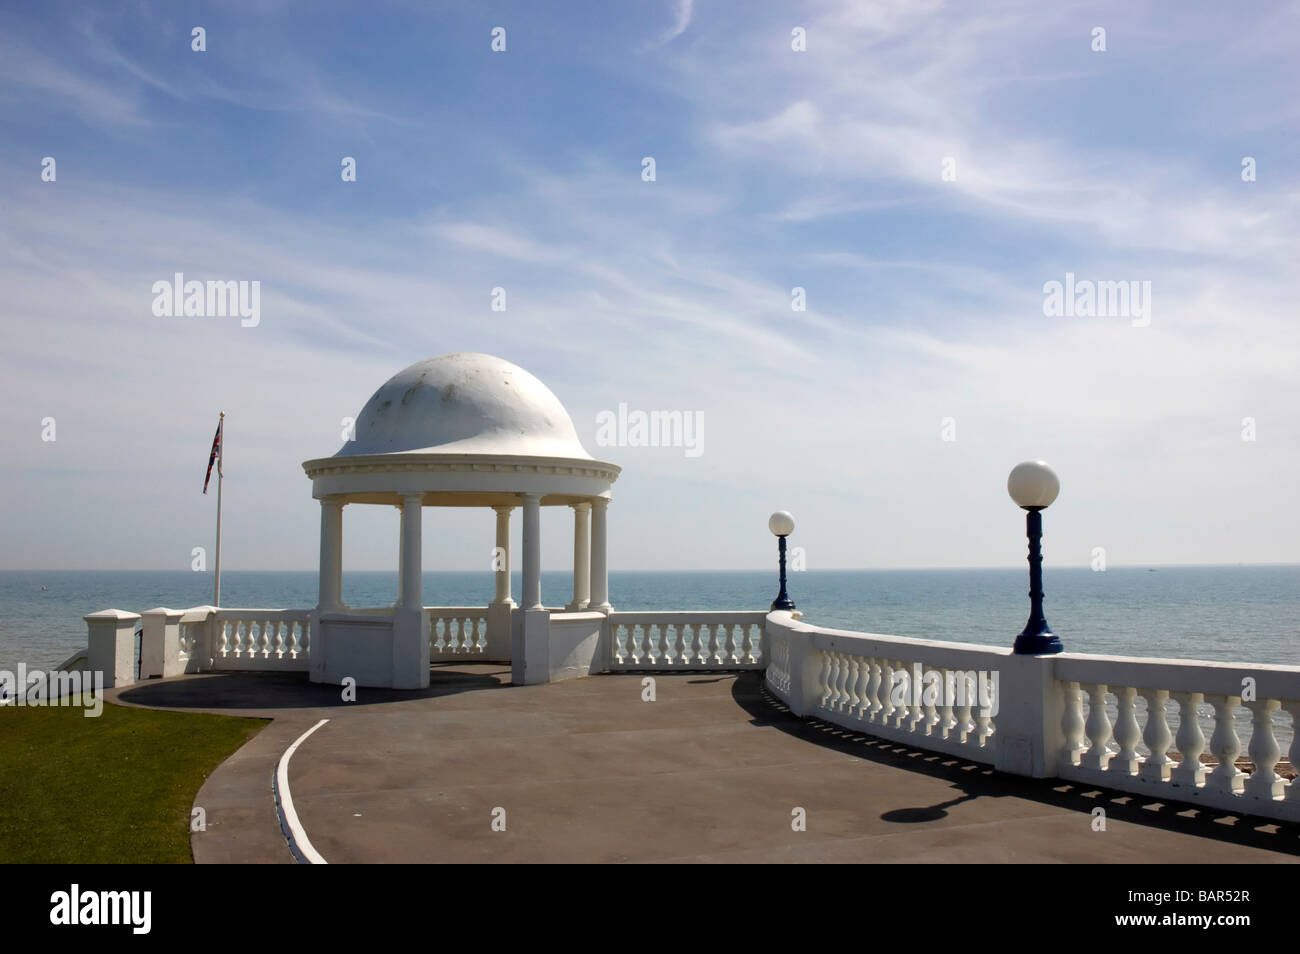 A dome on the promenade in an English seaside resort Stock Photo